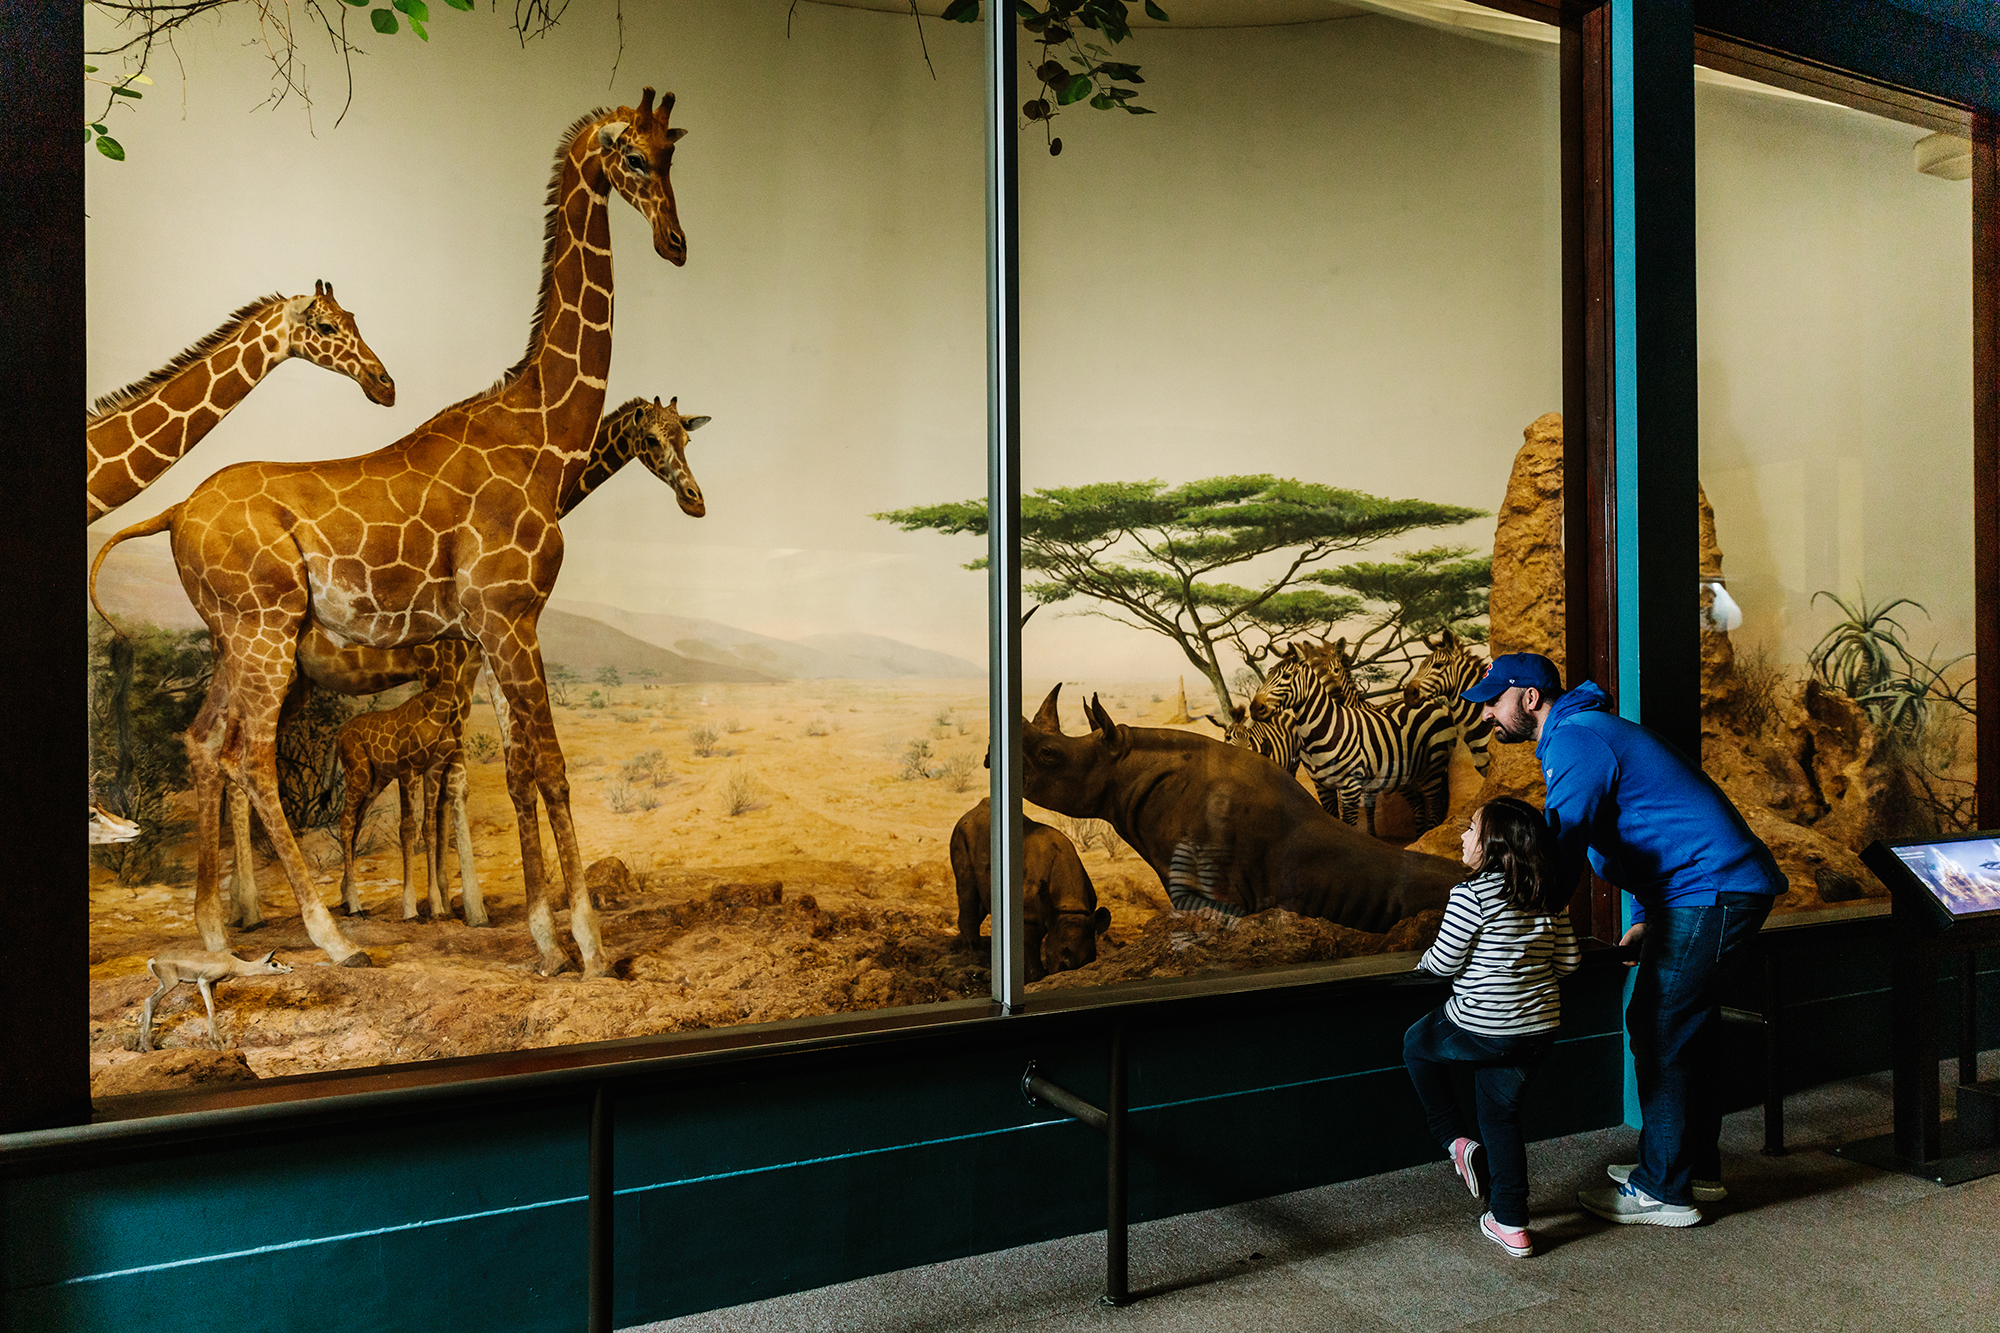 Museum visitors viewing a diorama featuring giraffes, rhinoceroses, and zebras.